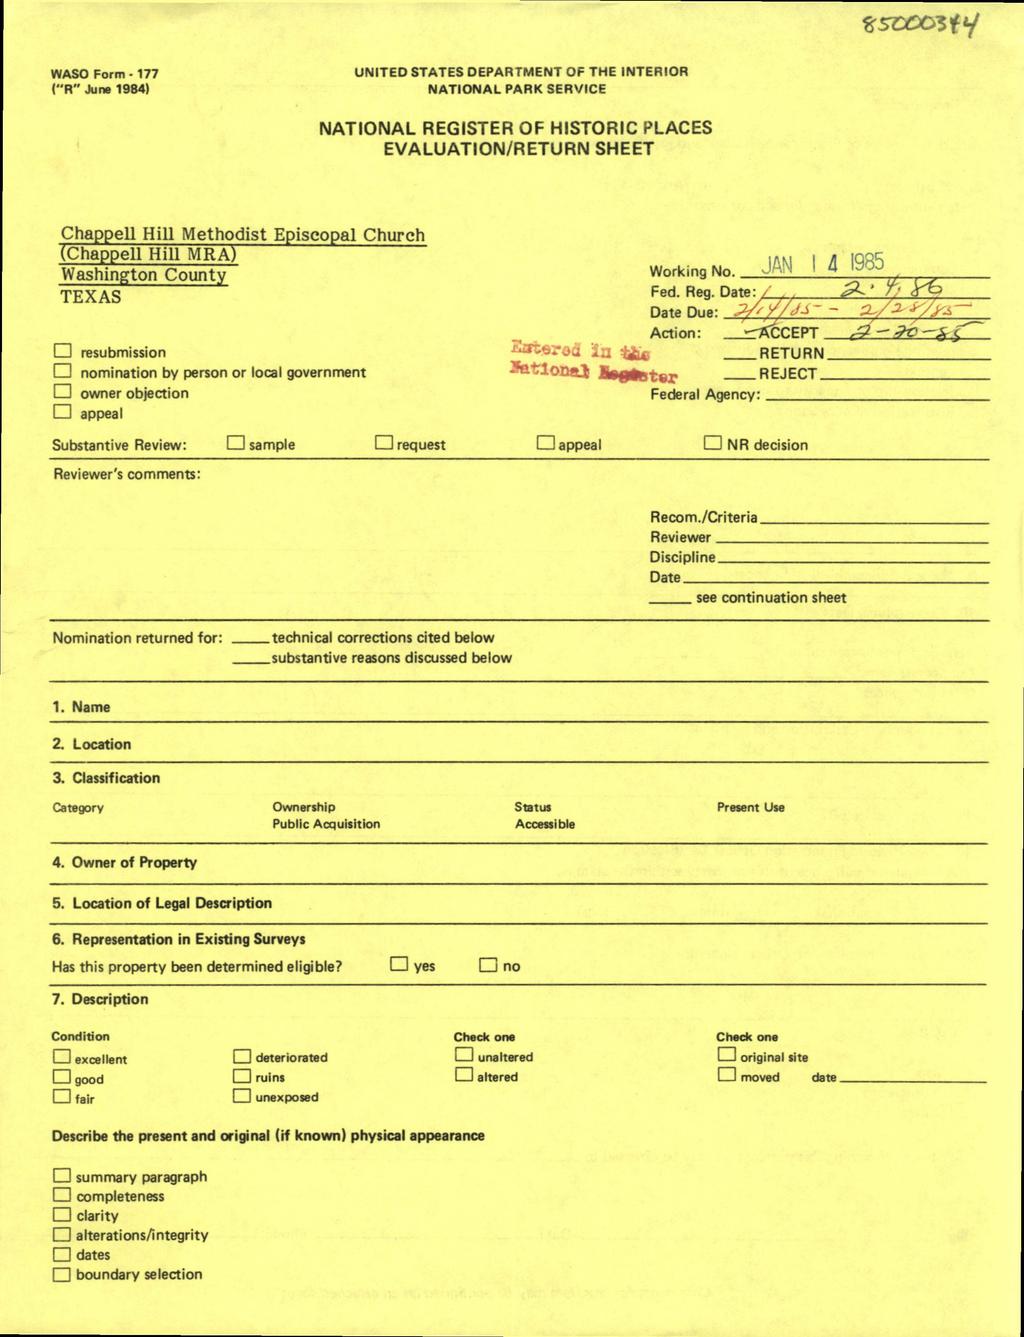 ^soooiii/ WASO Form - 177 ("R" June 1984) UNITED STATES DEPARTMENT OF THE INTERIOR NATIONAL PARK SERVICE NATIONAL REGISTER OF HISTORIC PLACES EVALUATION/RETURN SHEET Chappell Hill Methodist Episcopal